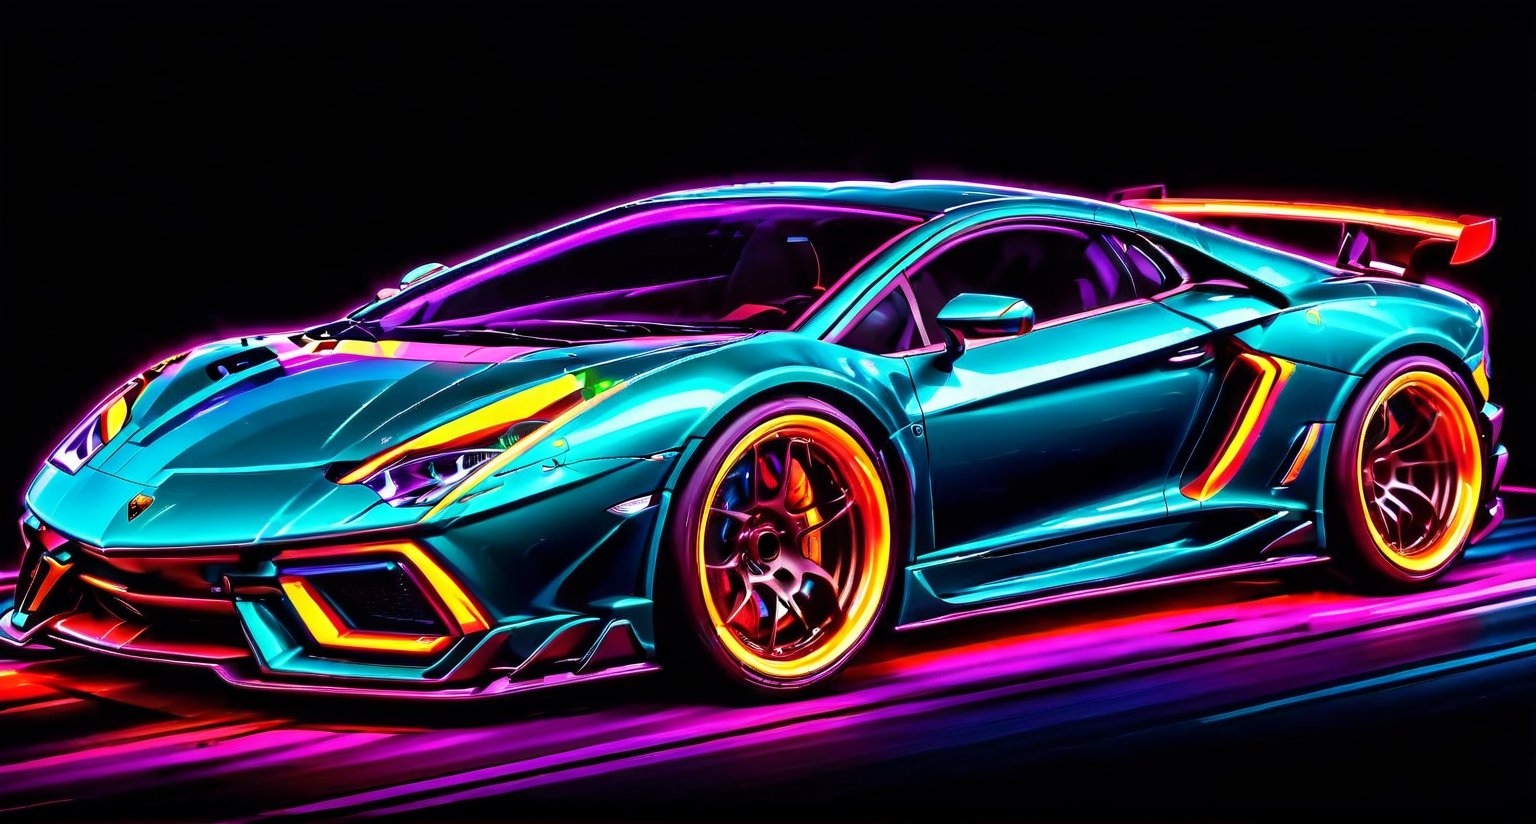 
ultra-detailed, 8K), race car, street racing-inspired, Drifting inspired, LED, ((Twin headlights)), (((Bright neon color racing stripes))), (Black racing wheels), Wheel spin showing motion, Show car in motion, Burnout, wide body kit, modified car, racing livery, realistic, ultra highres, (full dual colour neon lights:1.2), (hard dual color lighting:1.4), (detailed background), (ultra detailed), intricate, comprehensive cinematic, magical photography, (gradients), glossy, Night with galaxy sky, Fast action style, fire out of tail pipes, Sideways drifting in to a turn, Neon galaxy metalic paint with race stripes, GTR Nismo, NSX, Porsche, Lamborghini, Ferrari, Bugatti, Ariel Atom, BMW, Audi, Mazda, Toyota supra, Lamborghini Aventador, aesthetic, intricate, realistic, Neon Paint, streaks of fire, (((depth of field))), cinematic lighting, cinematic lighting, speed lines, (masterpiece), best quality, masterpiece, best quality, (masterpiece:1.2), (best quality)
,neon,photorealistic,H effect,c_car,night city,DonML4zrP0pXL